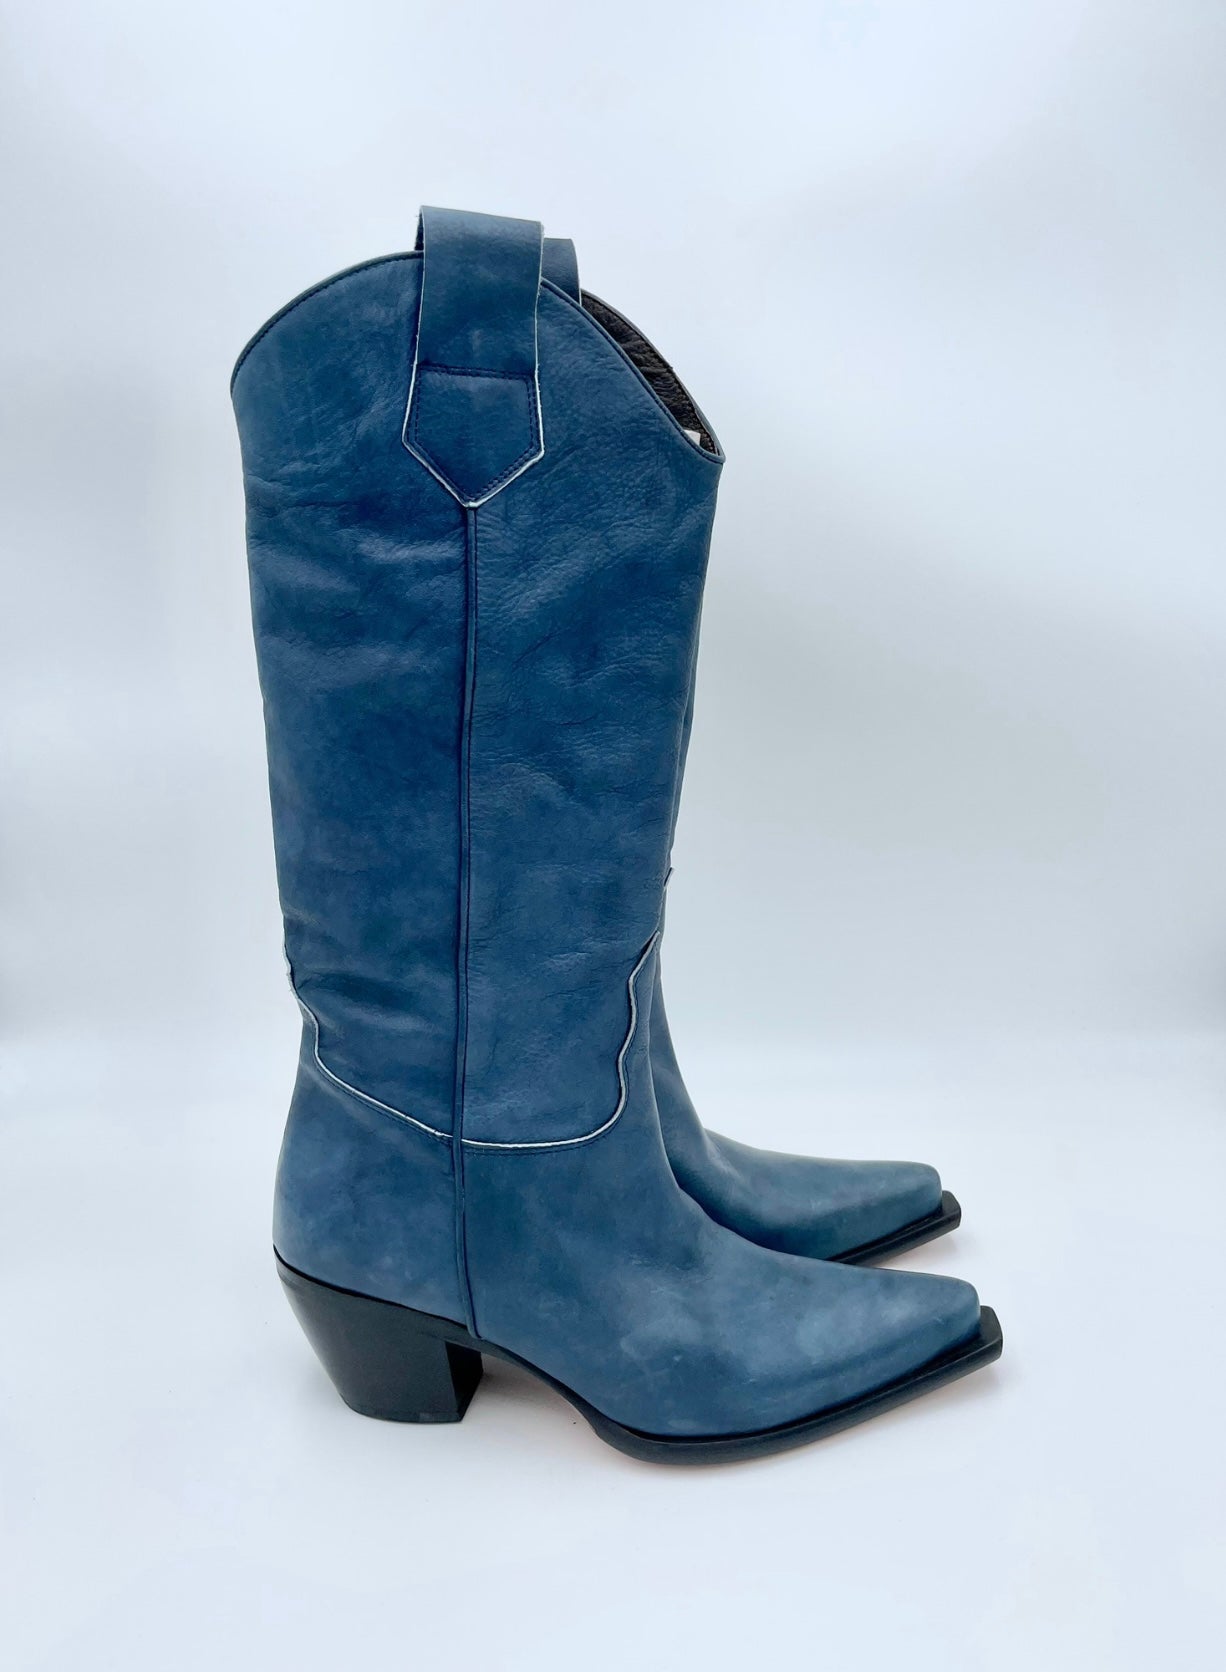 Entourage Made in italy Texano in vera pelle - blu - Made in Italy